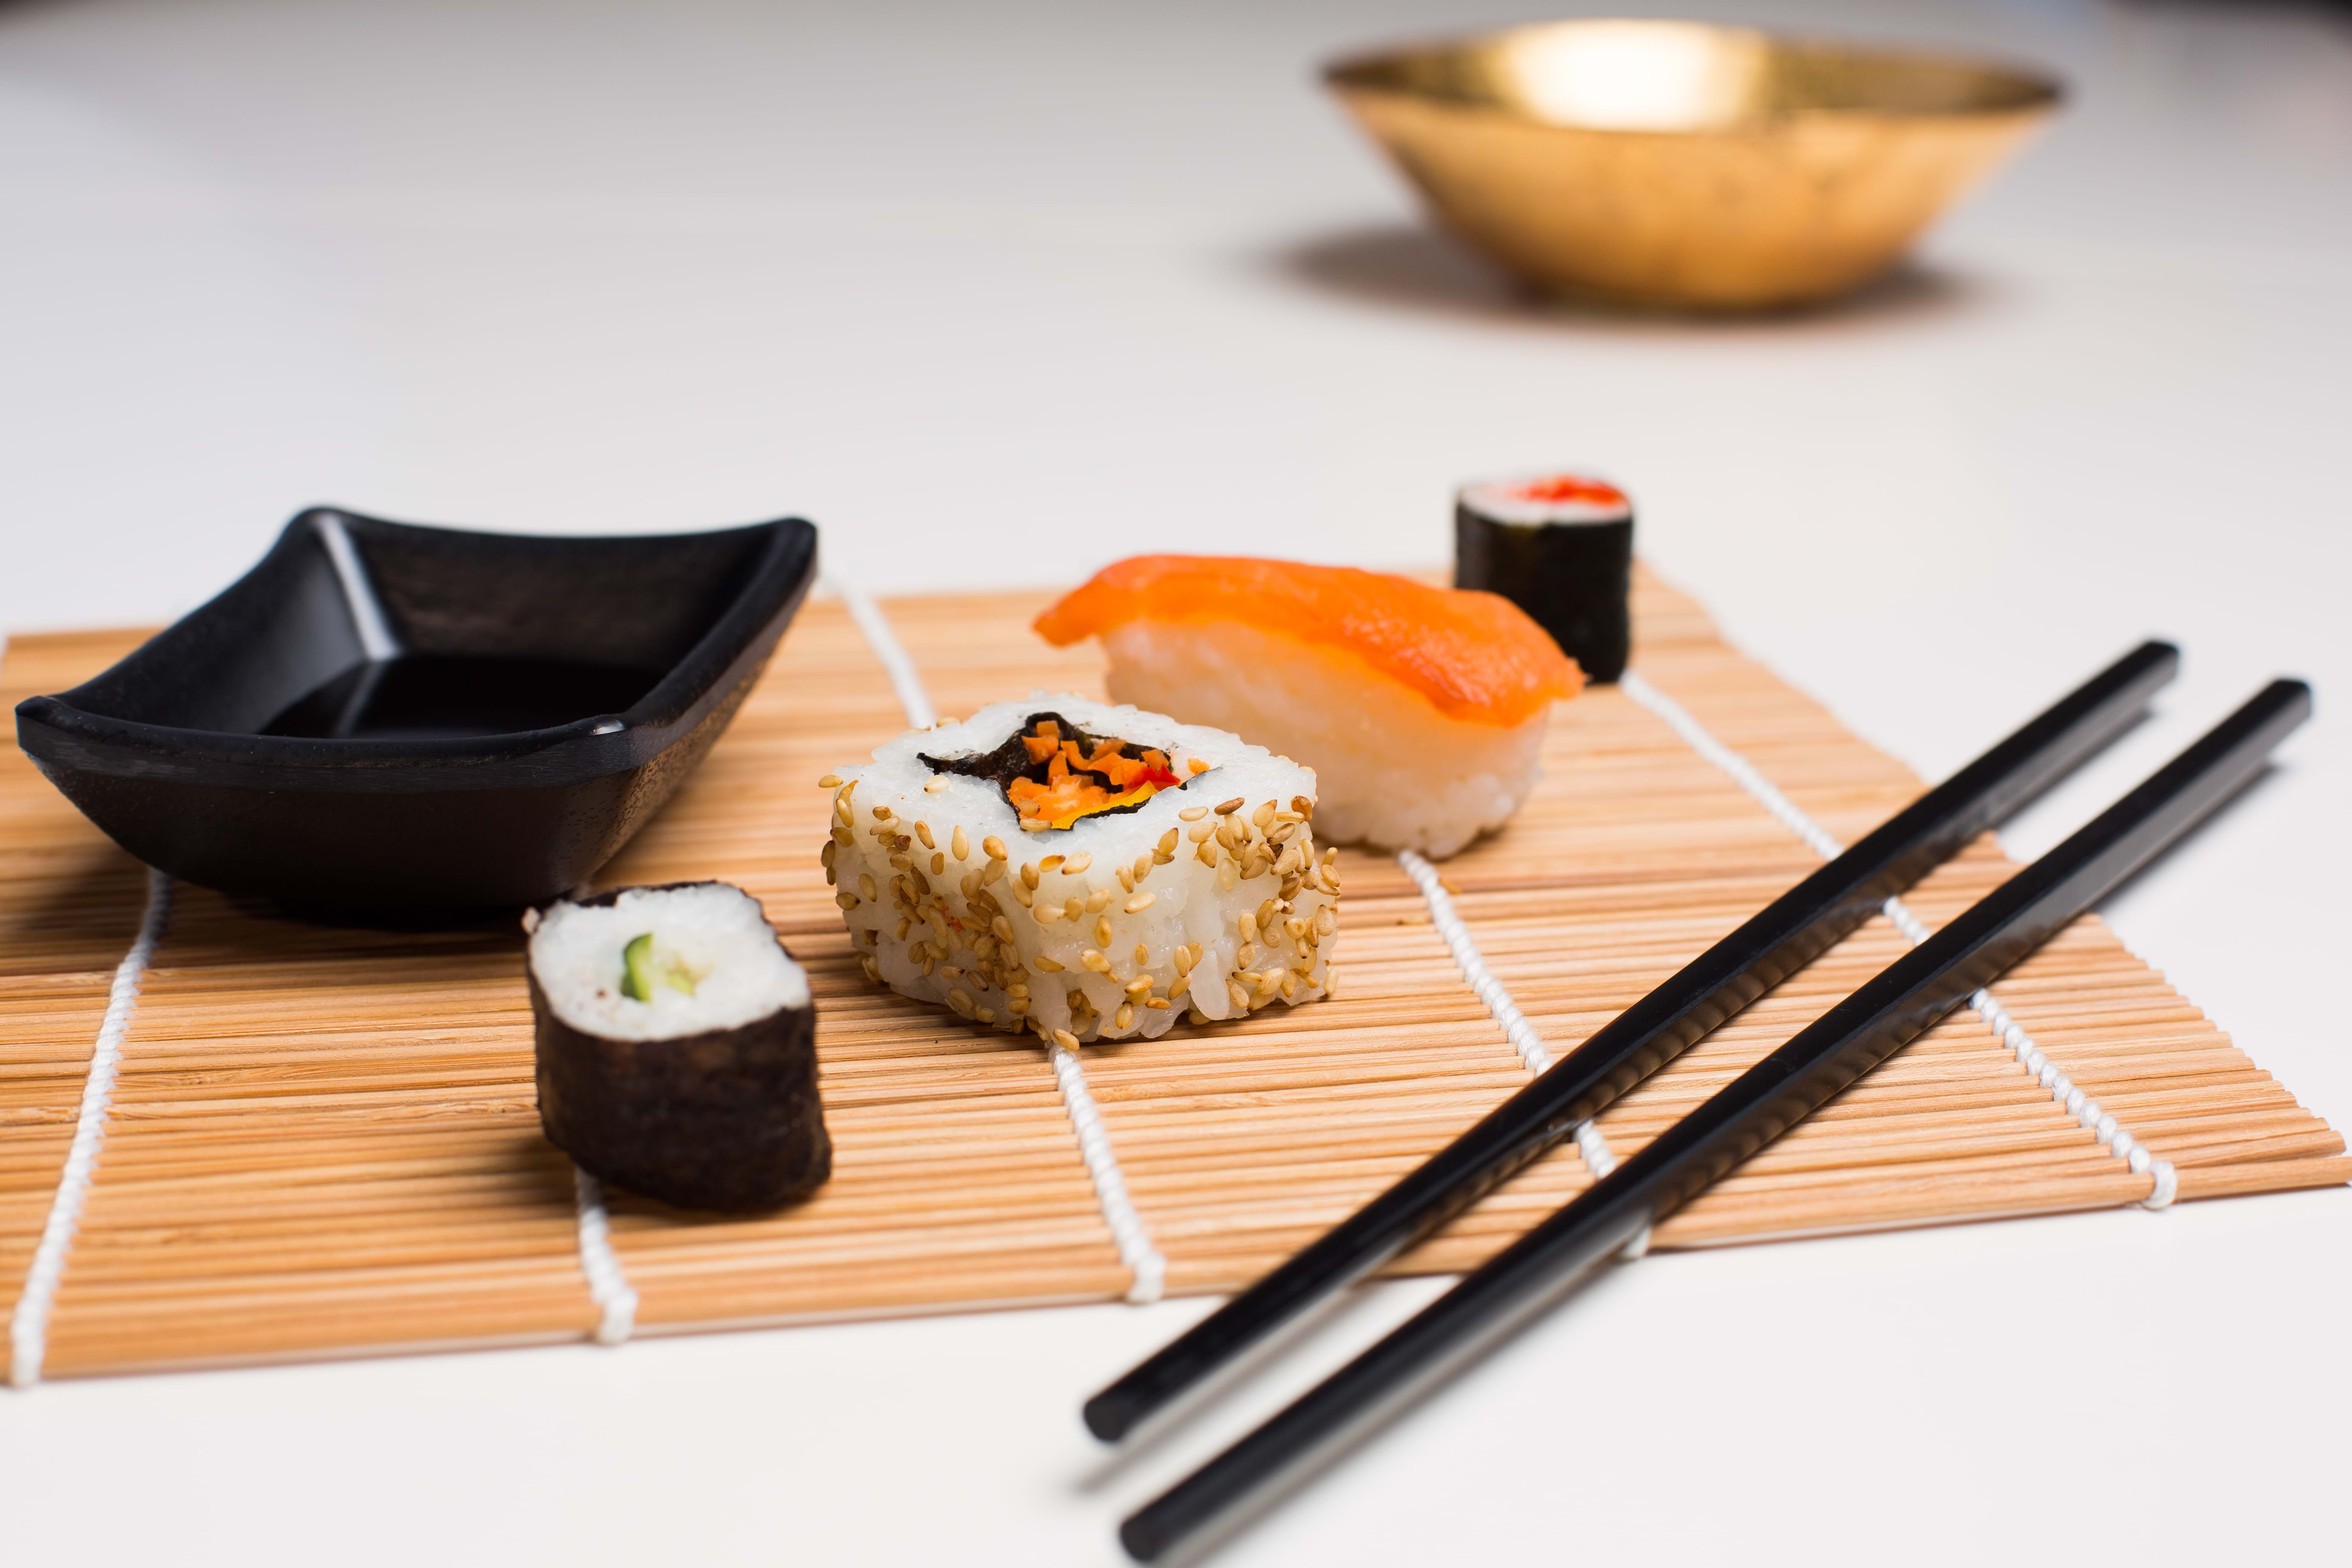 Photo of some pieces of sushi with chopsticks and small sauce bowl alongside it